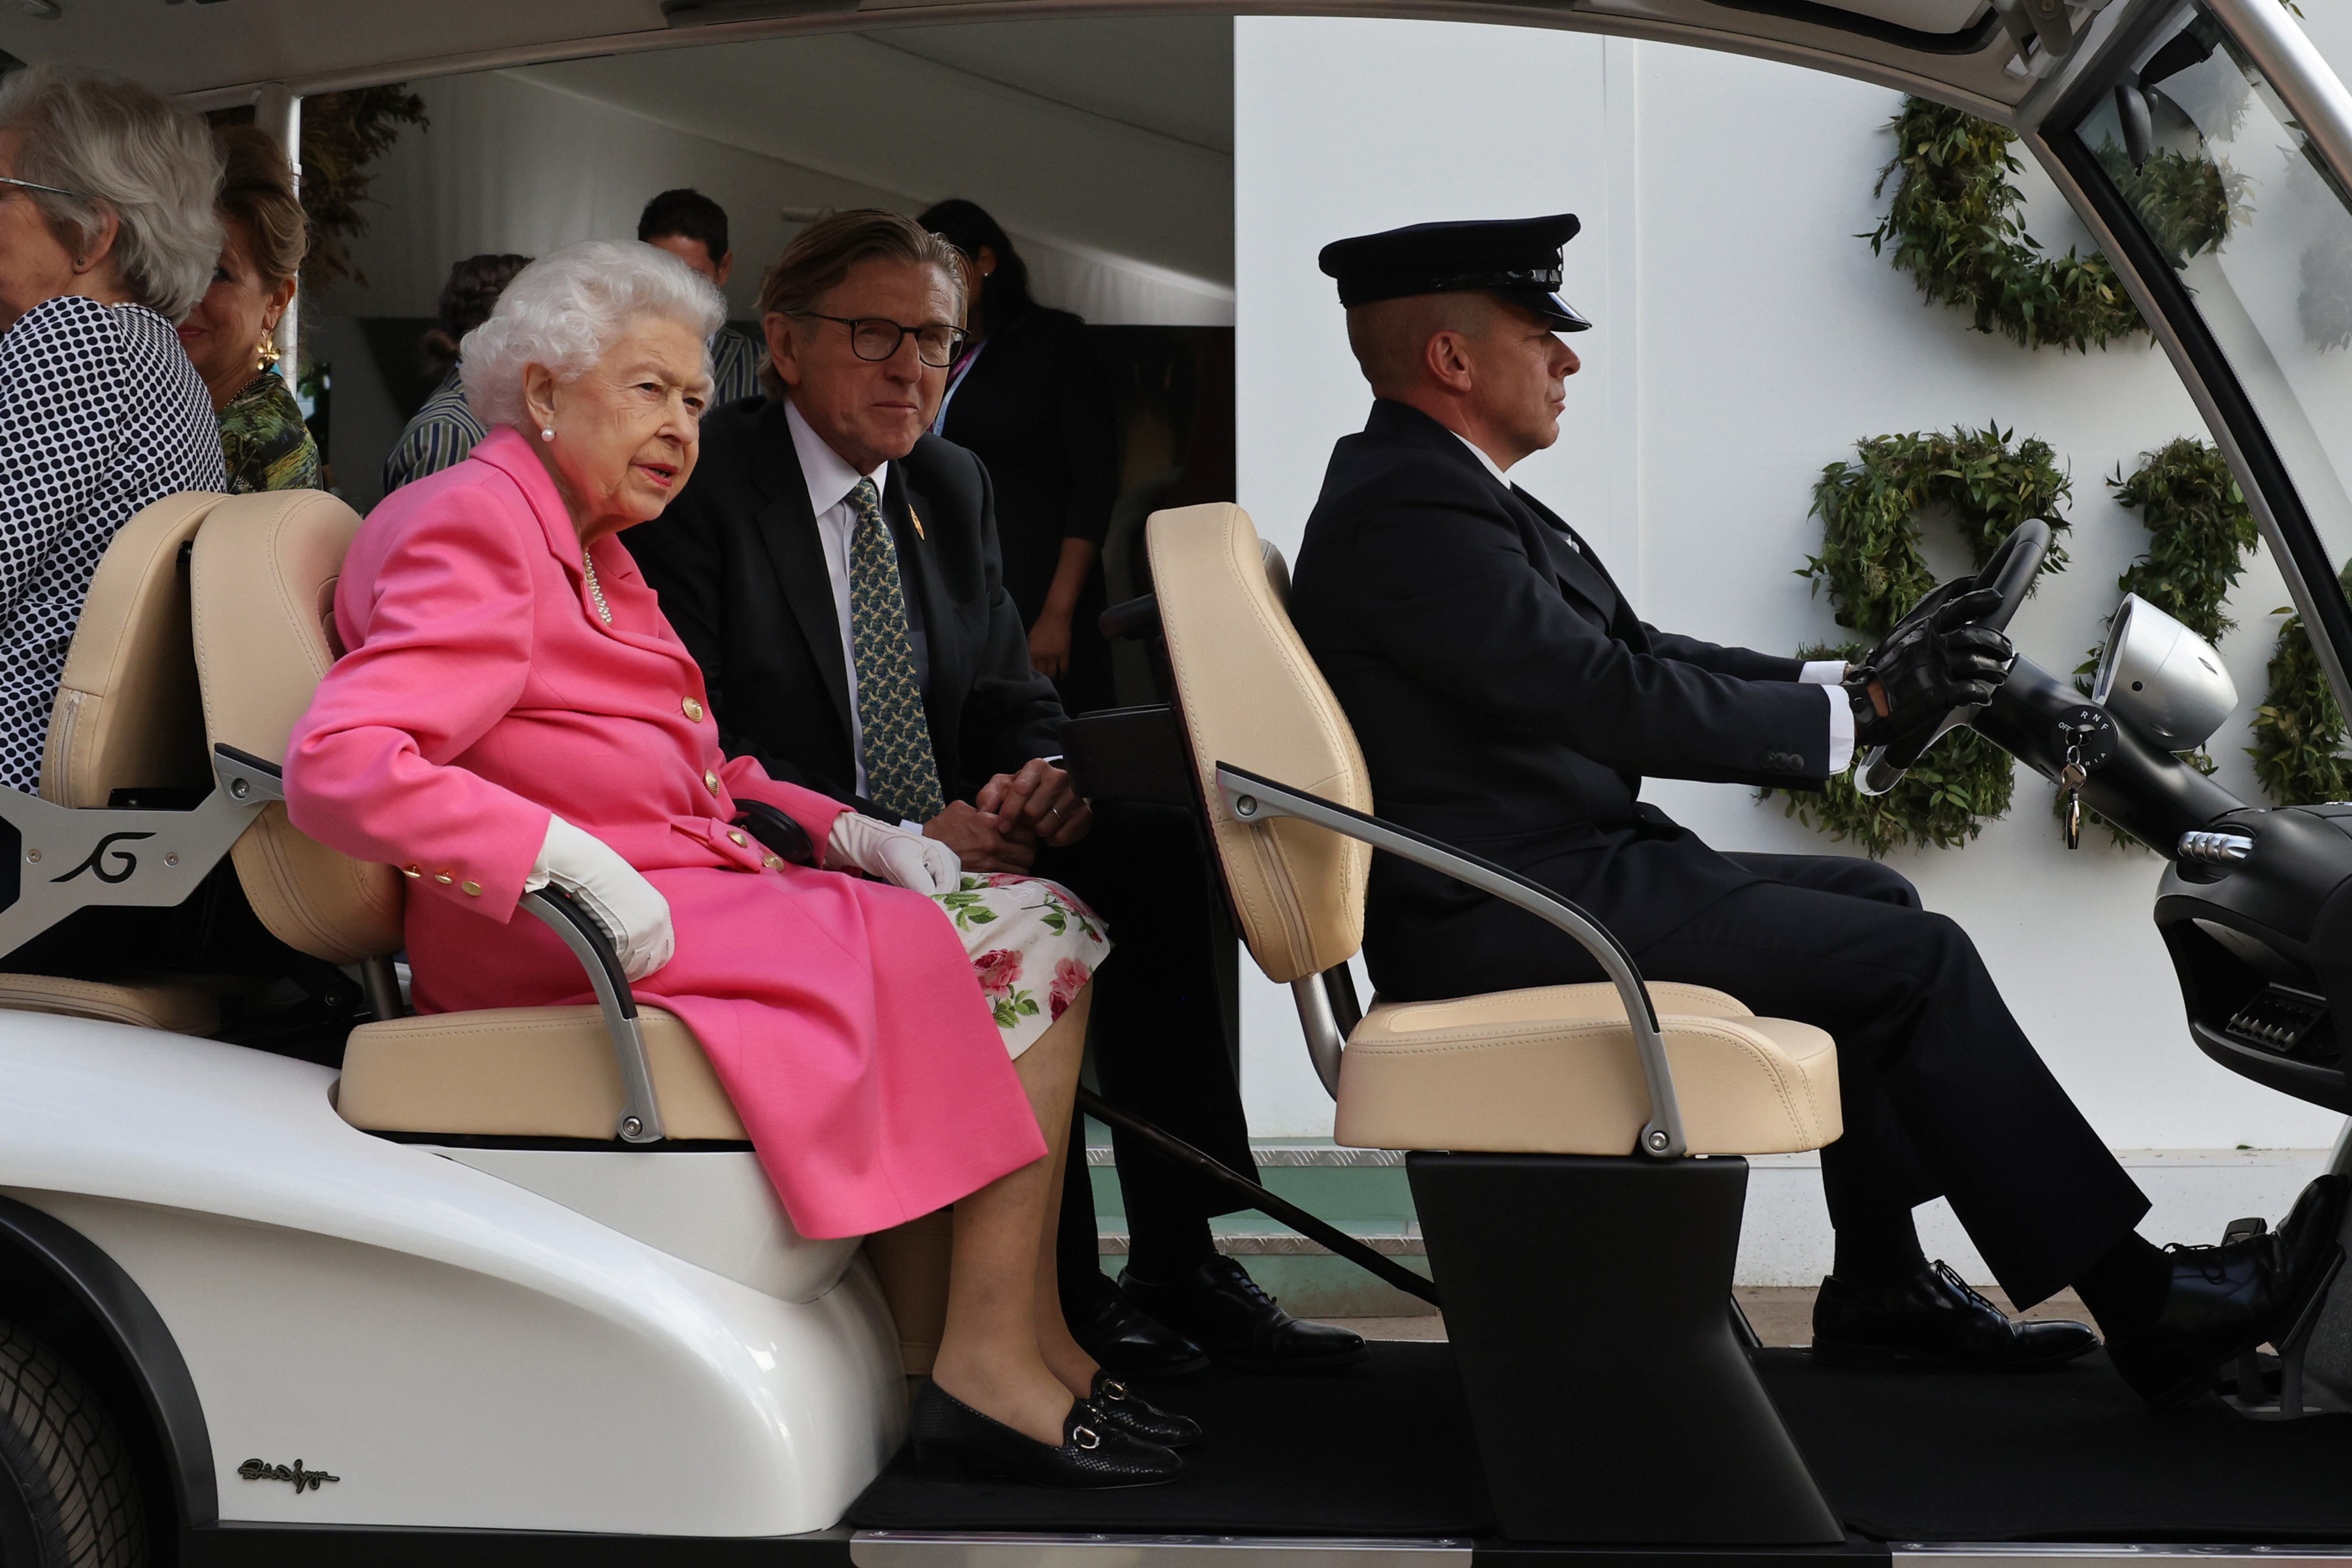 The Queen toured the Chelsea Flower Show by buggy and was joined by Keith Weed, President of the Royal Horticultural Society (Dan Kitwood/PA)